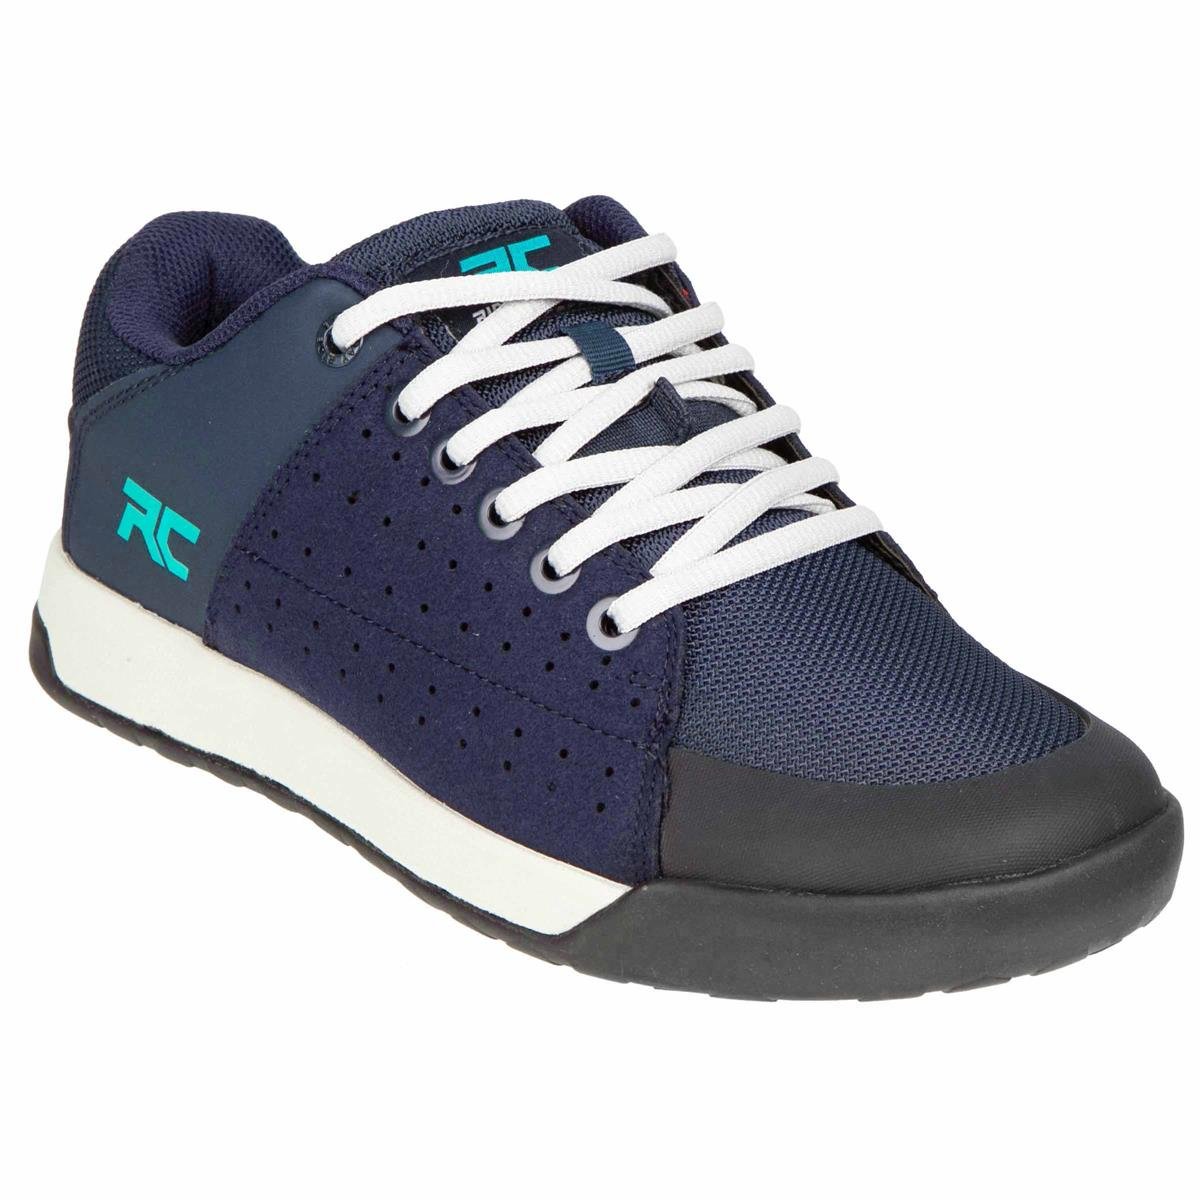 Ride Concepts Girls Bike Shoes Livewire Navy/Teal